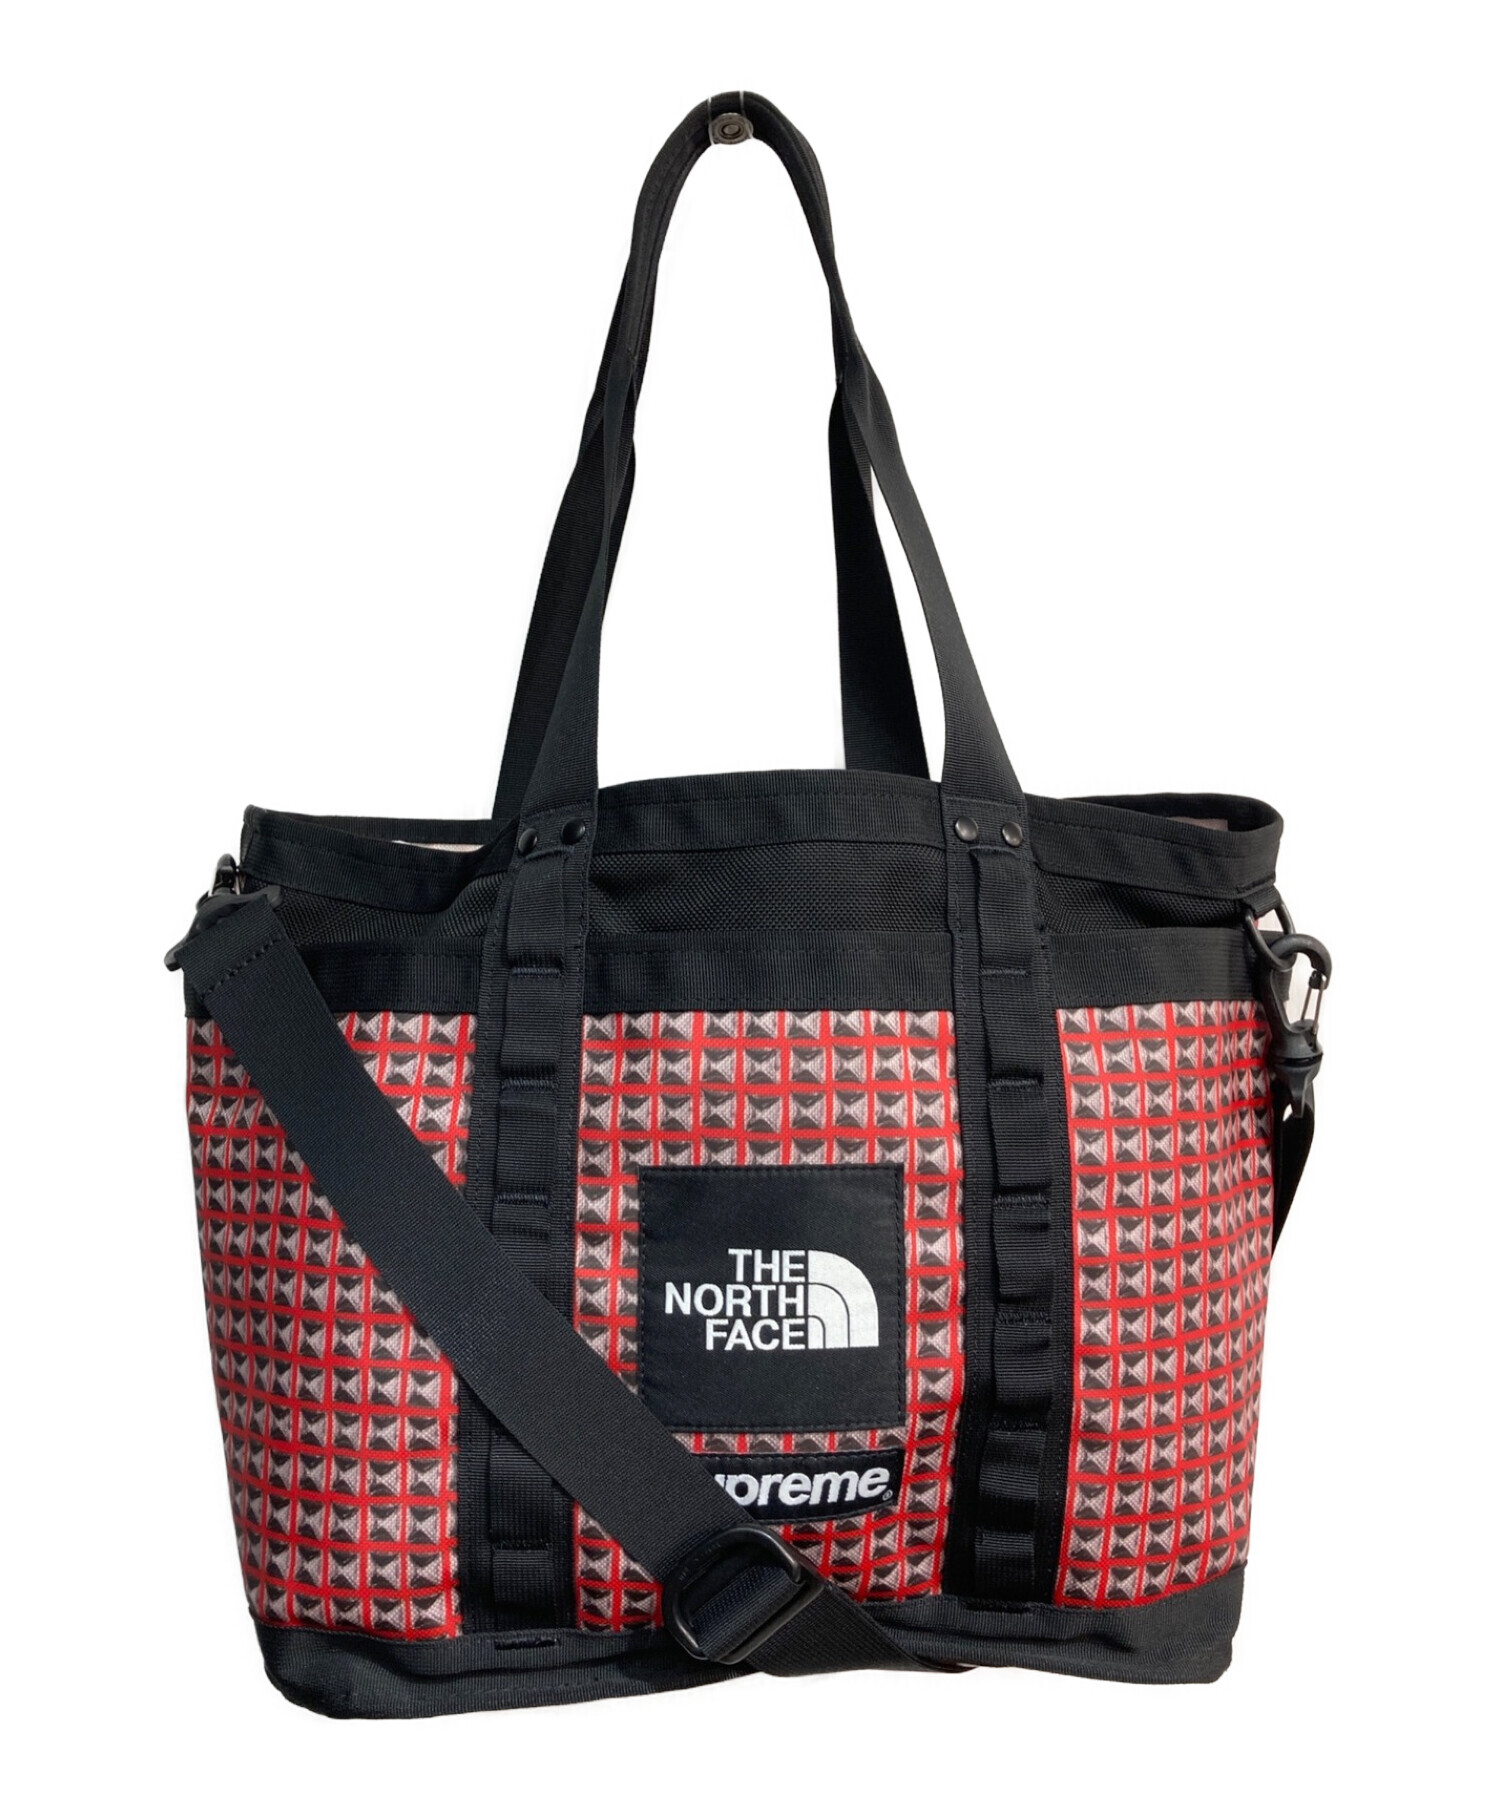 BlackSupreme / The North Face Studded Tote - トートバッグ